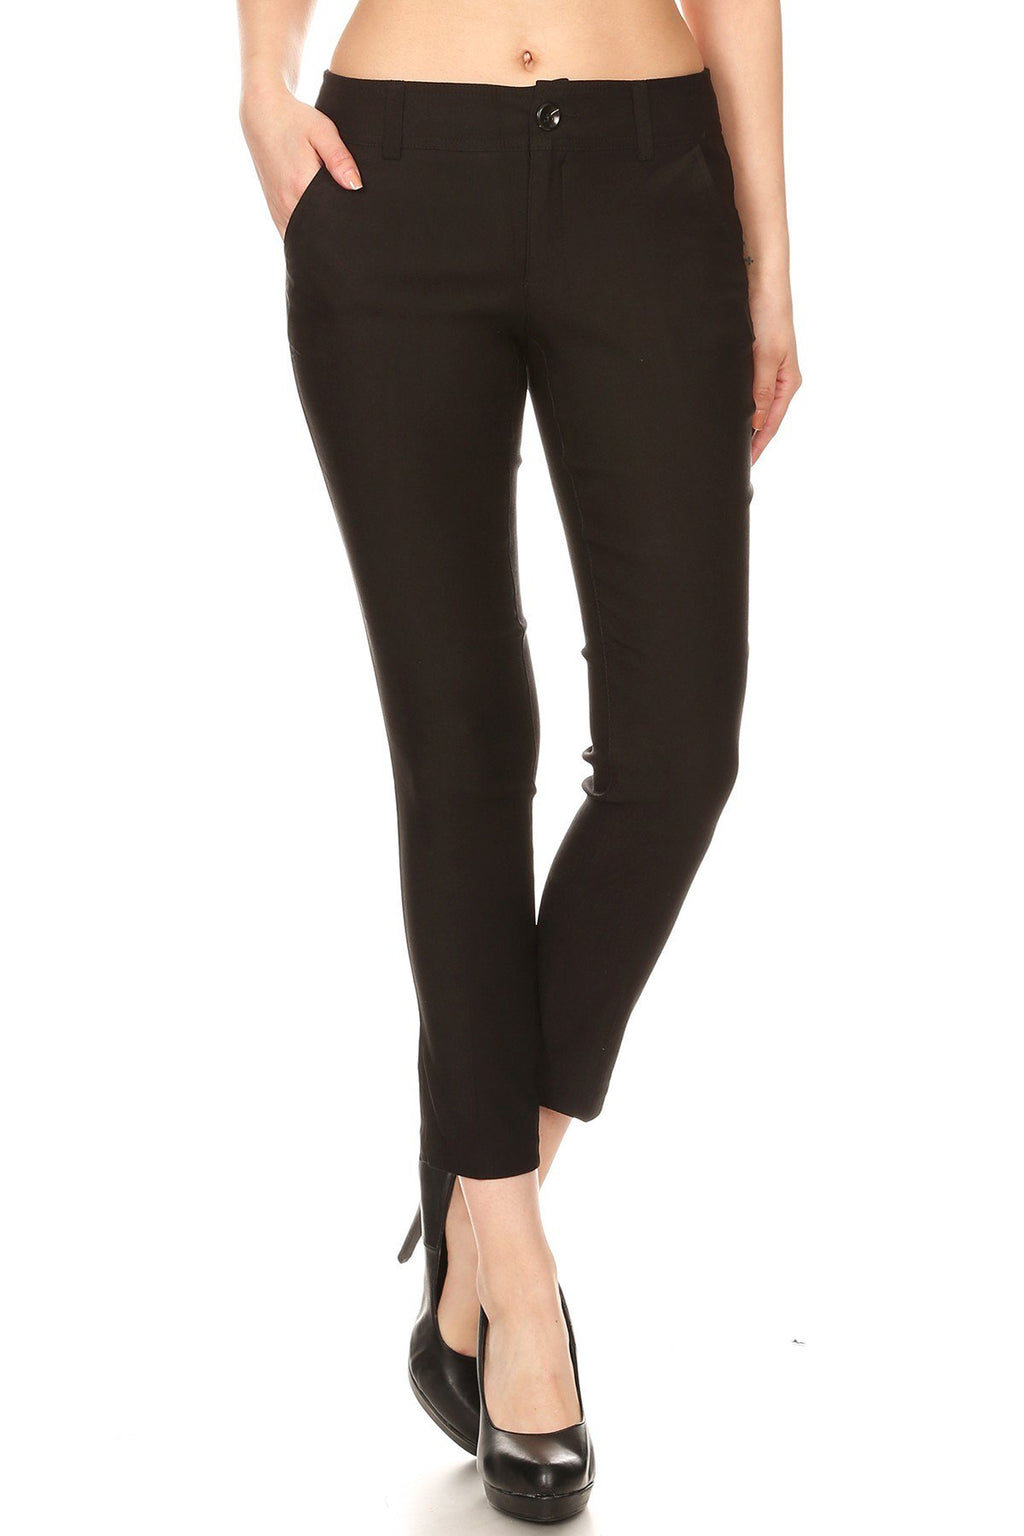 Solid, cropped, mid-rise pants in a slim fit with a button/zipper closure, and pockets on the front and back